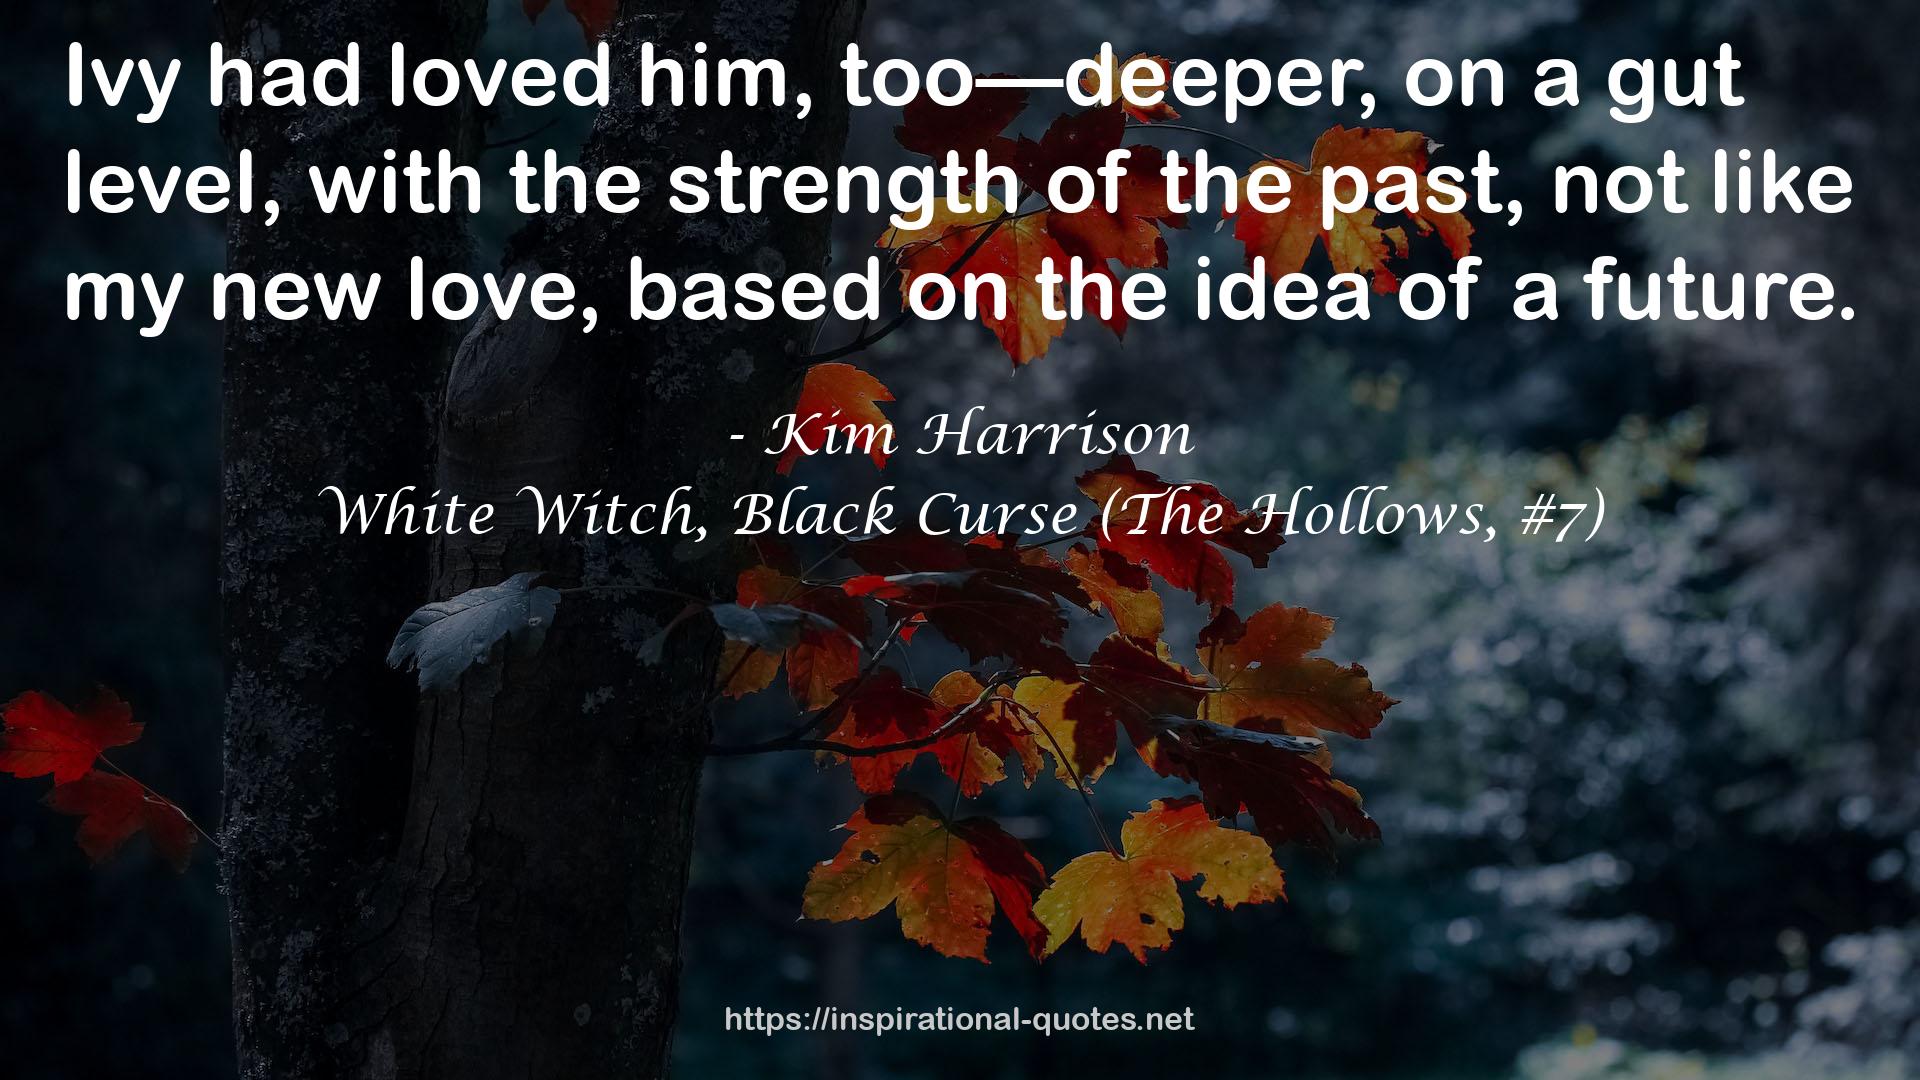 White Witch, Black Curse (The Hollows, #7) QUOTES